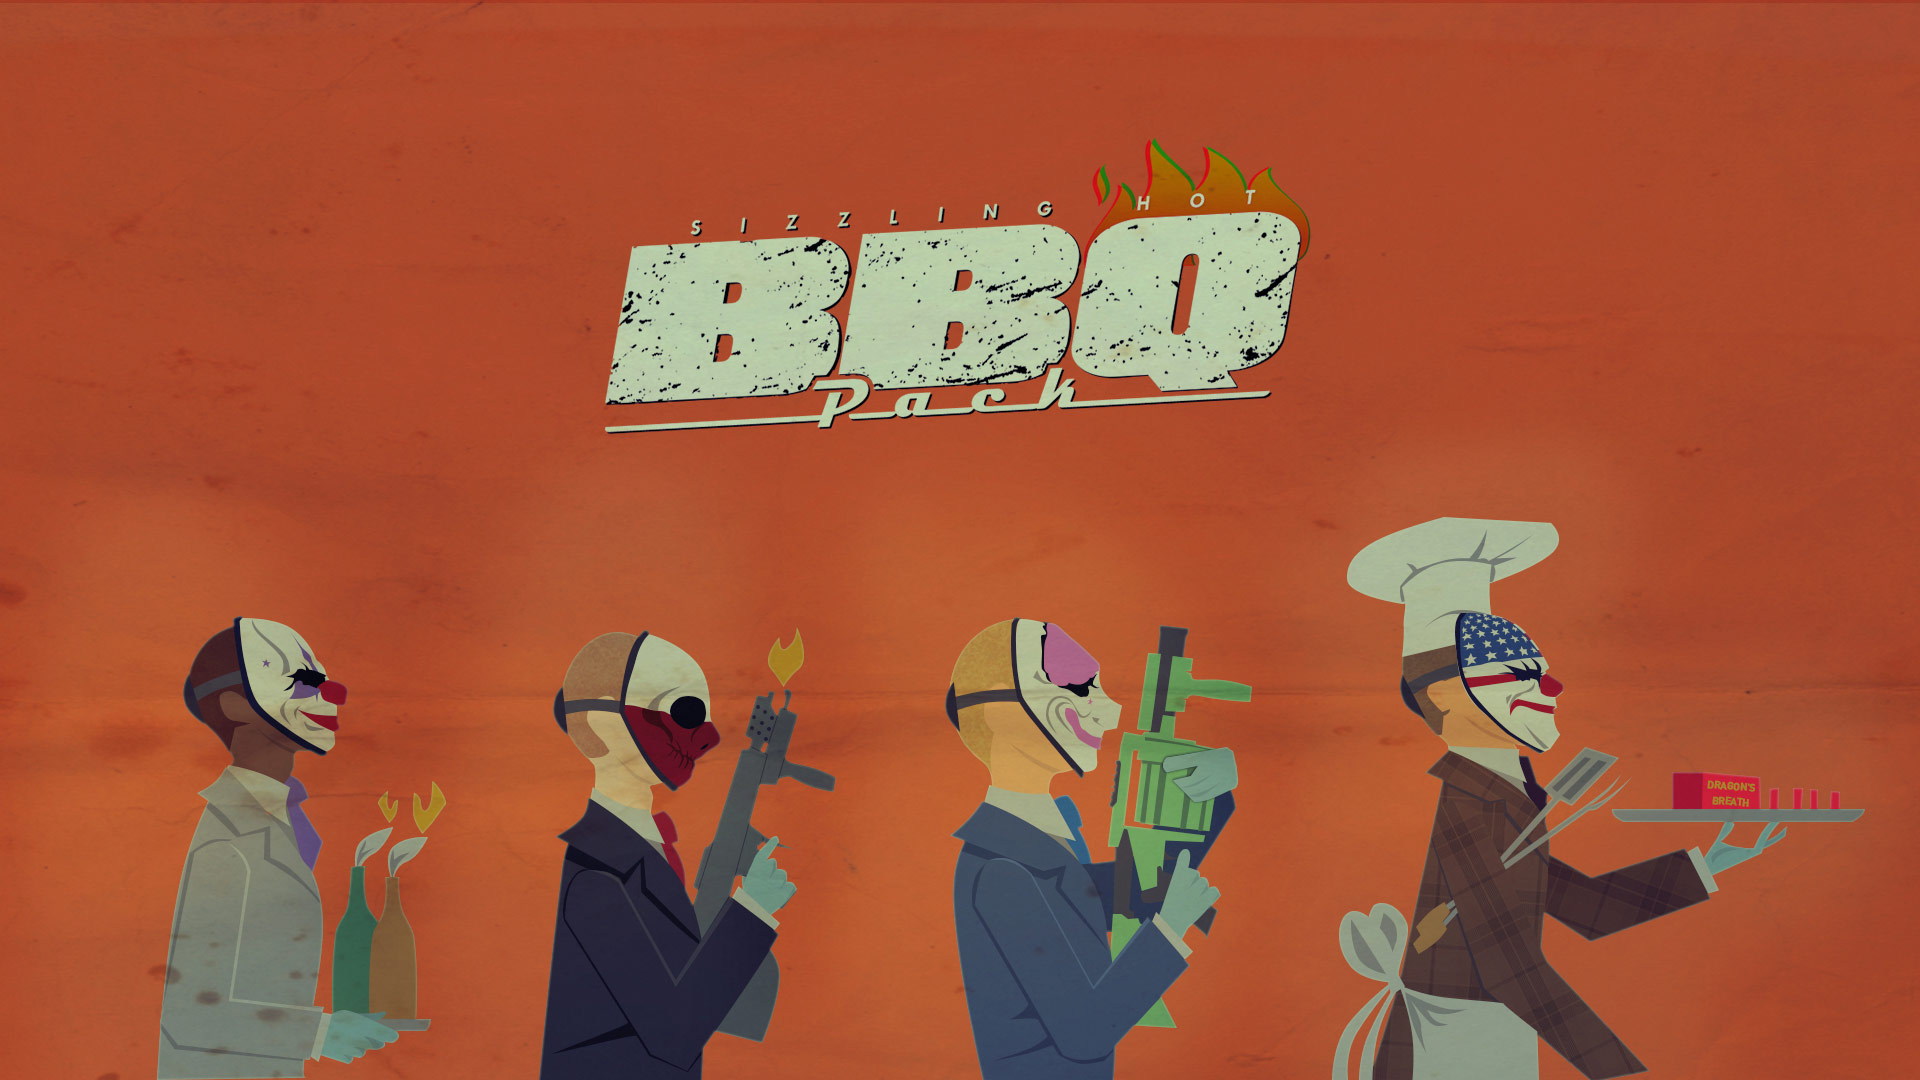 Payday 2 Wallpaper - Payday 2 Bbq Pack , HD Wallpaper & Backgrounds